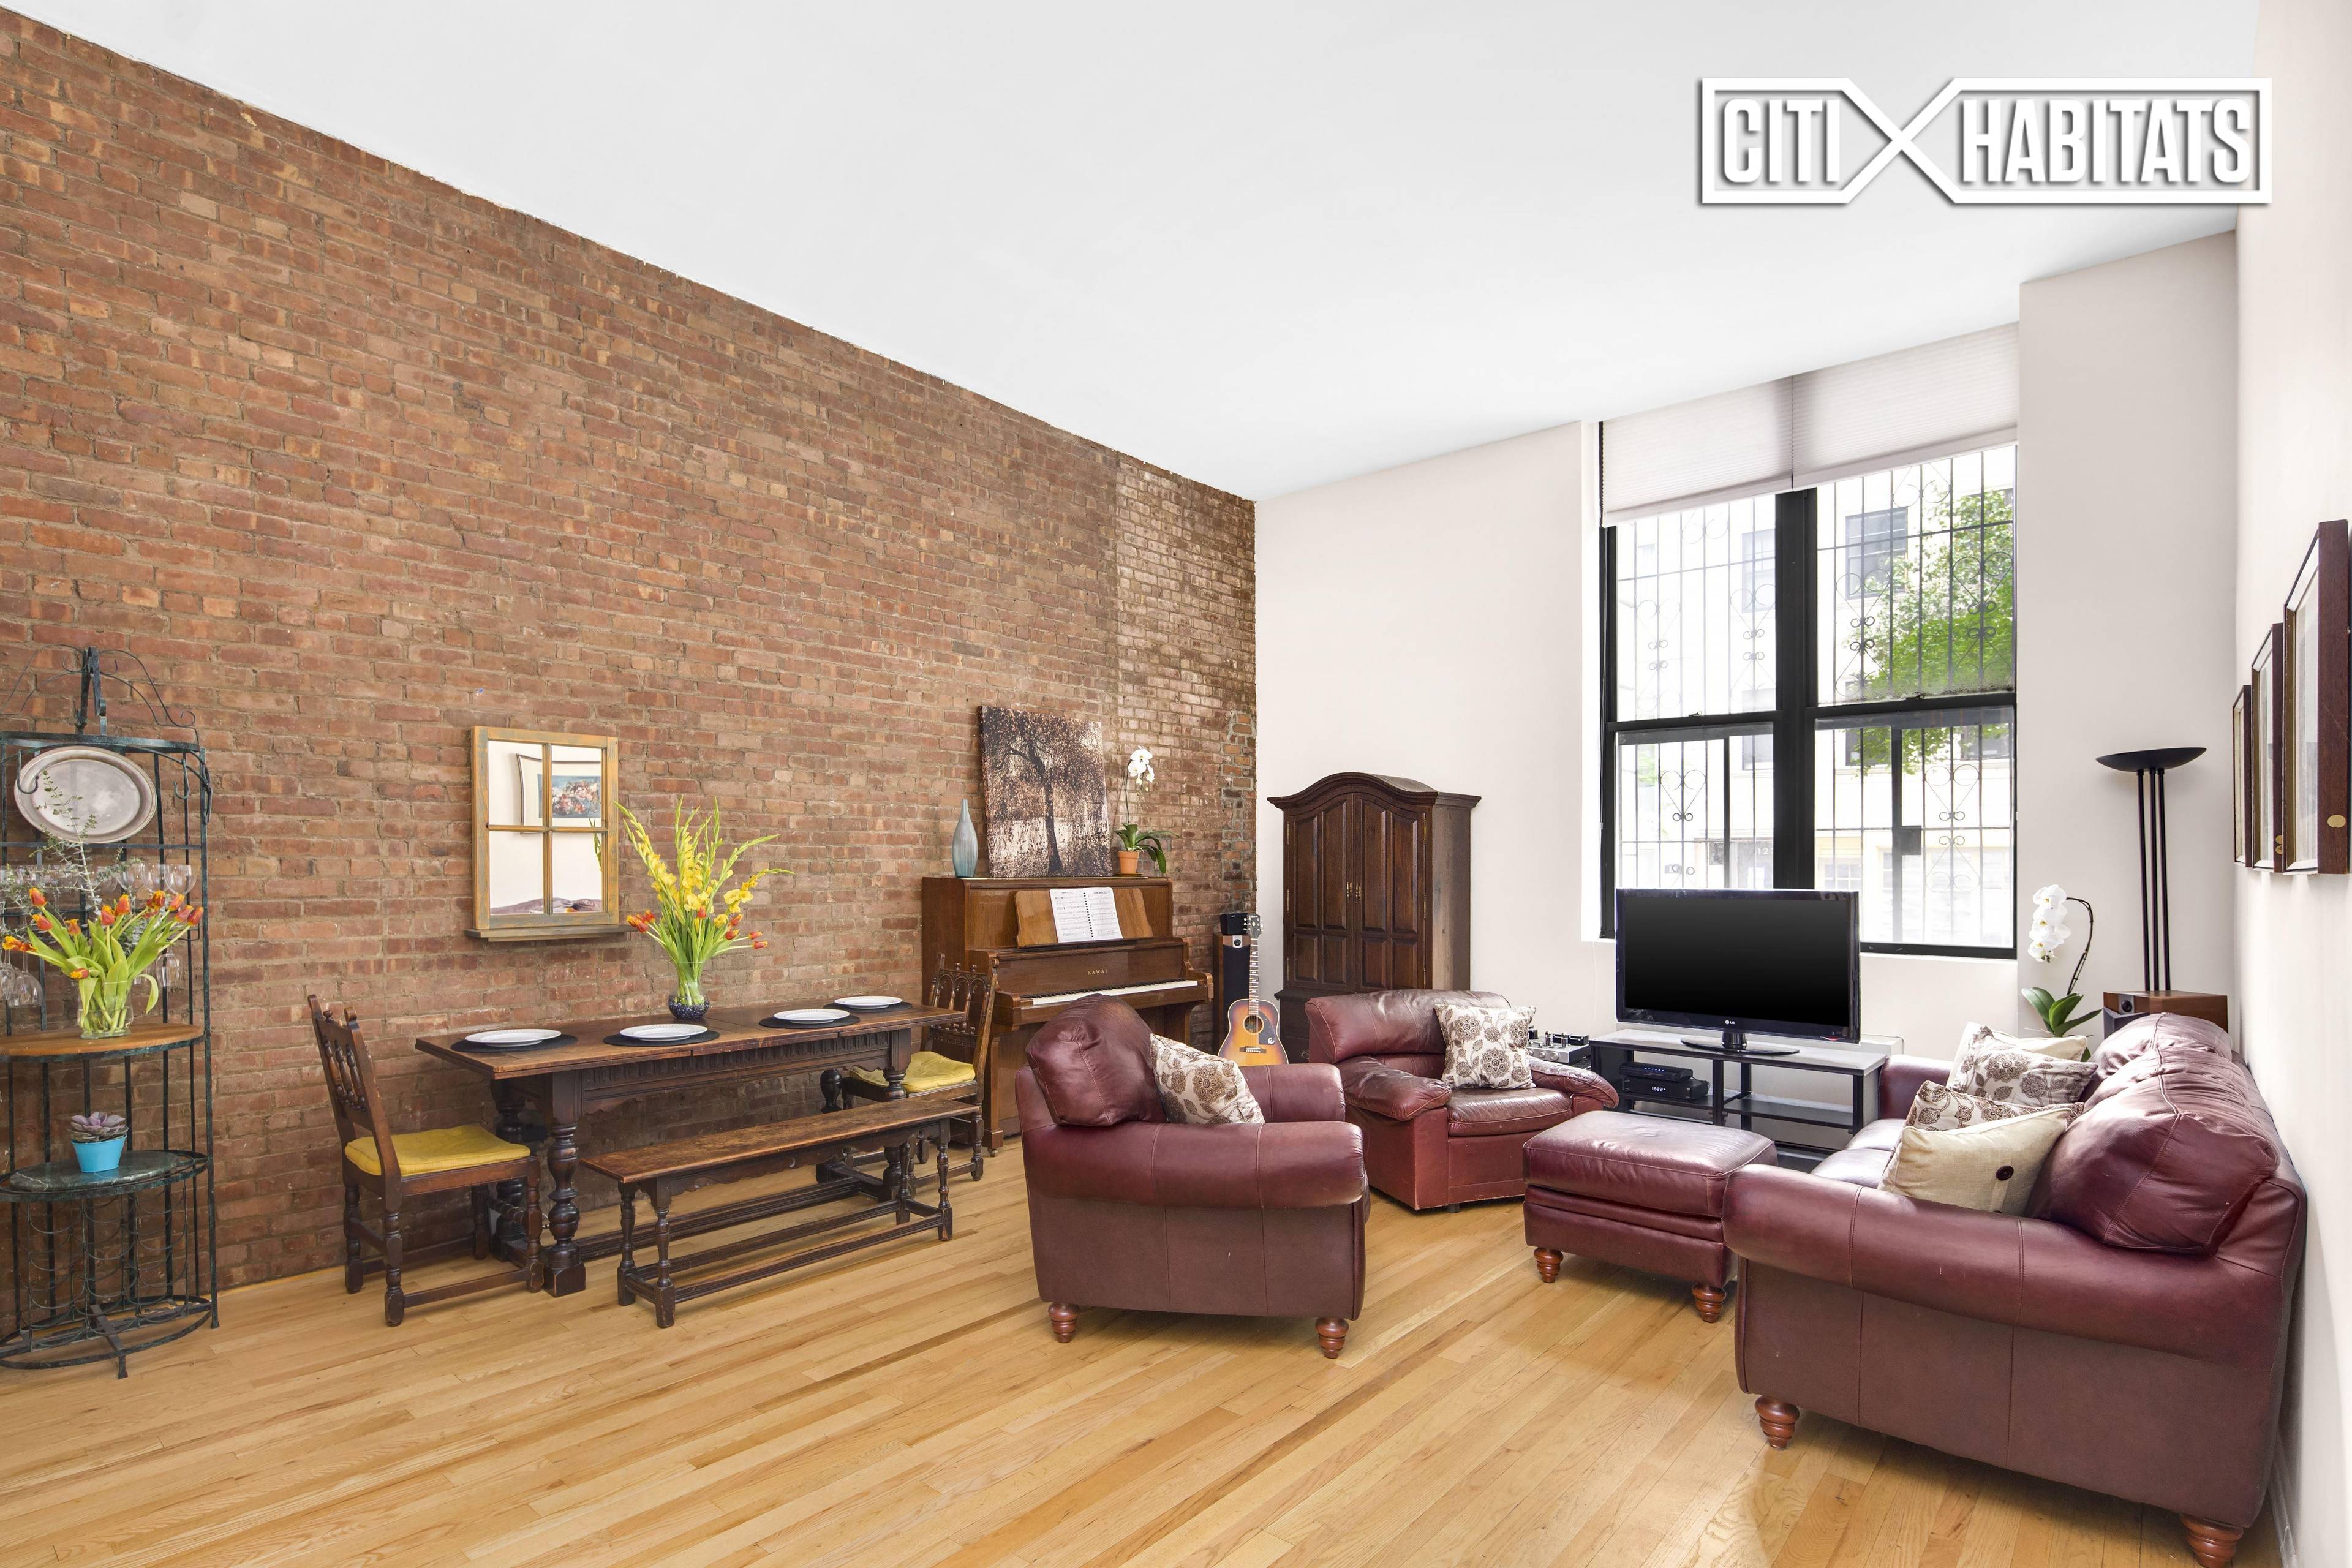 Entering Apartment 1A, one is immediately struck by the spaciousness of the 14 high sunken living room, the exposed brick walls, the wooden staircase to the balcony that serves as ...